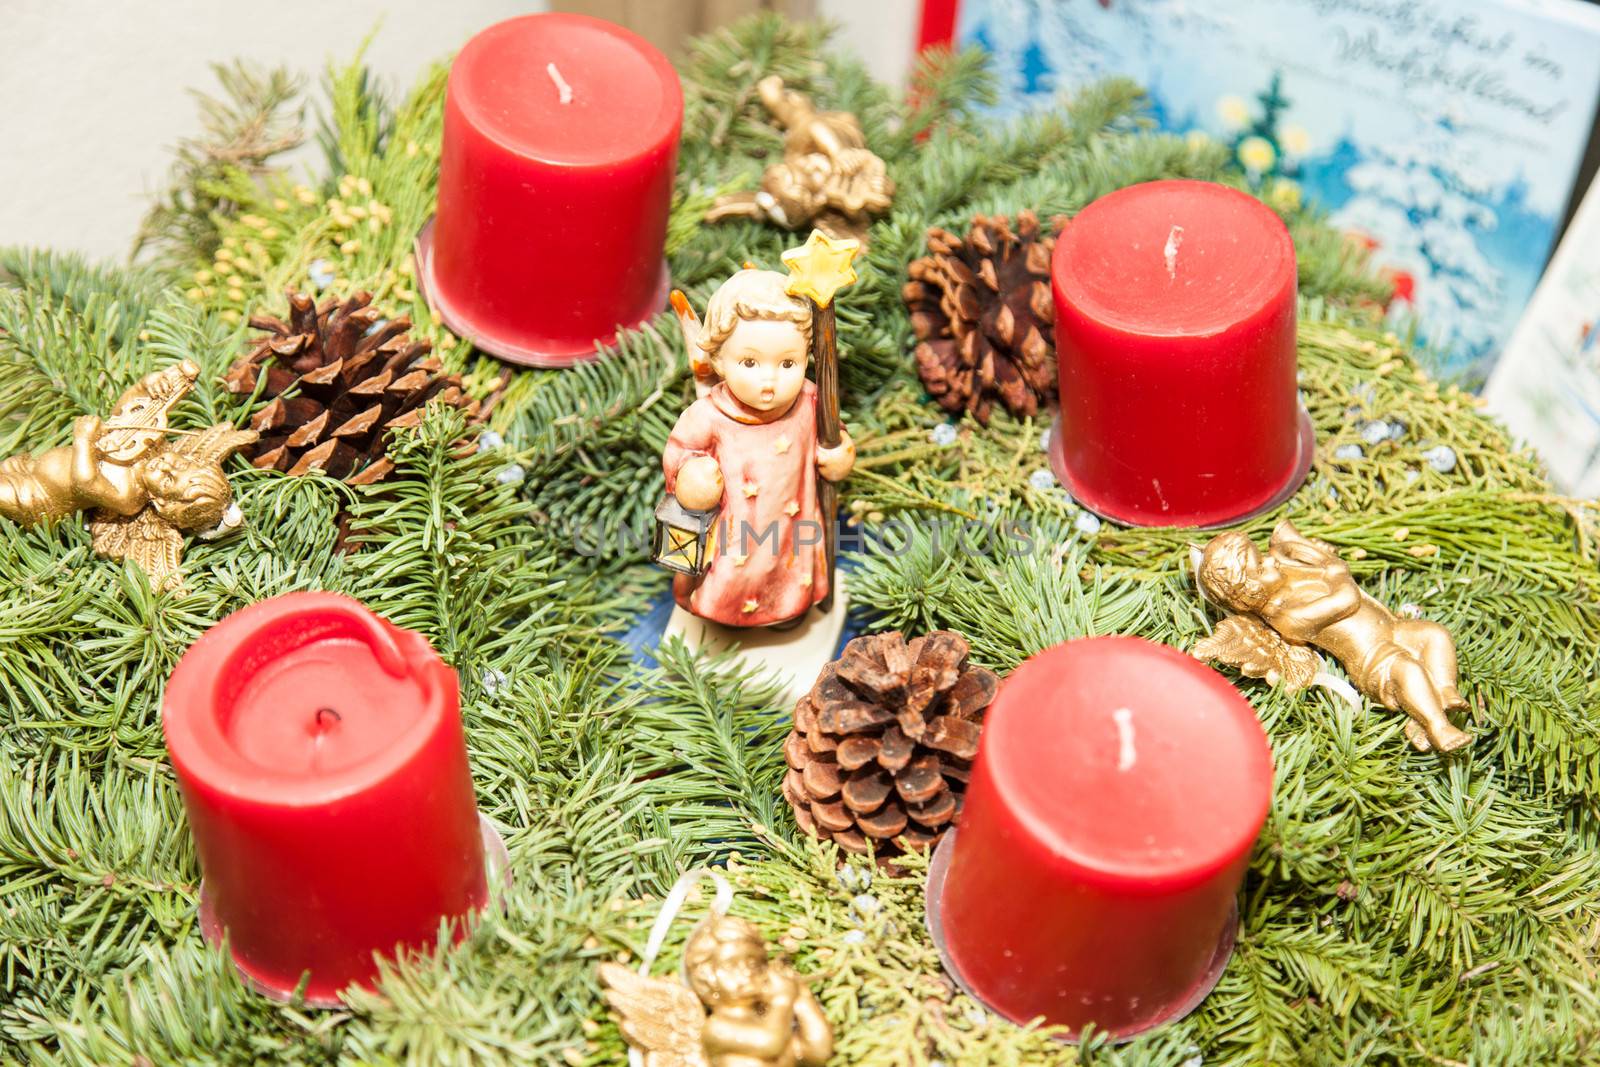 Christmas decorations with angel and red candles on tree branch.